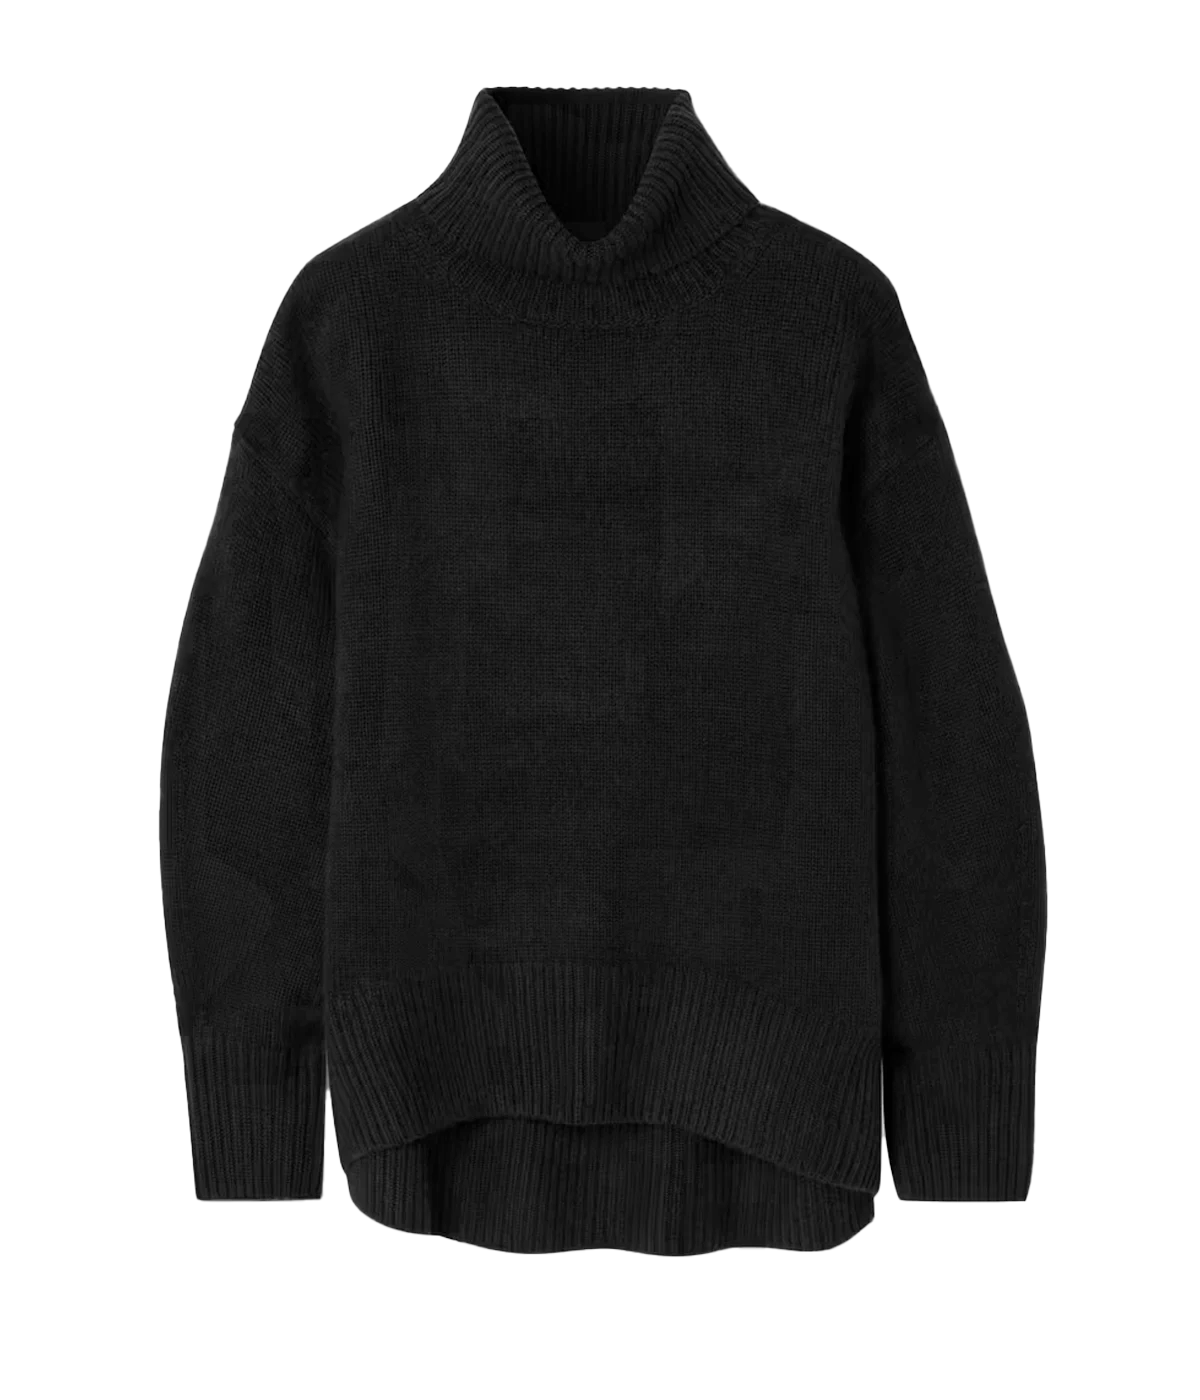 Worlds End Sweater in Black